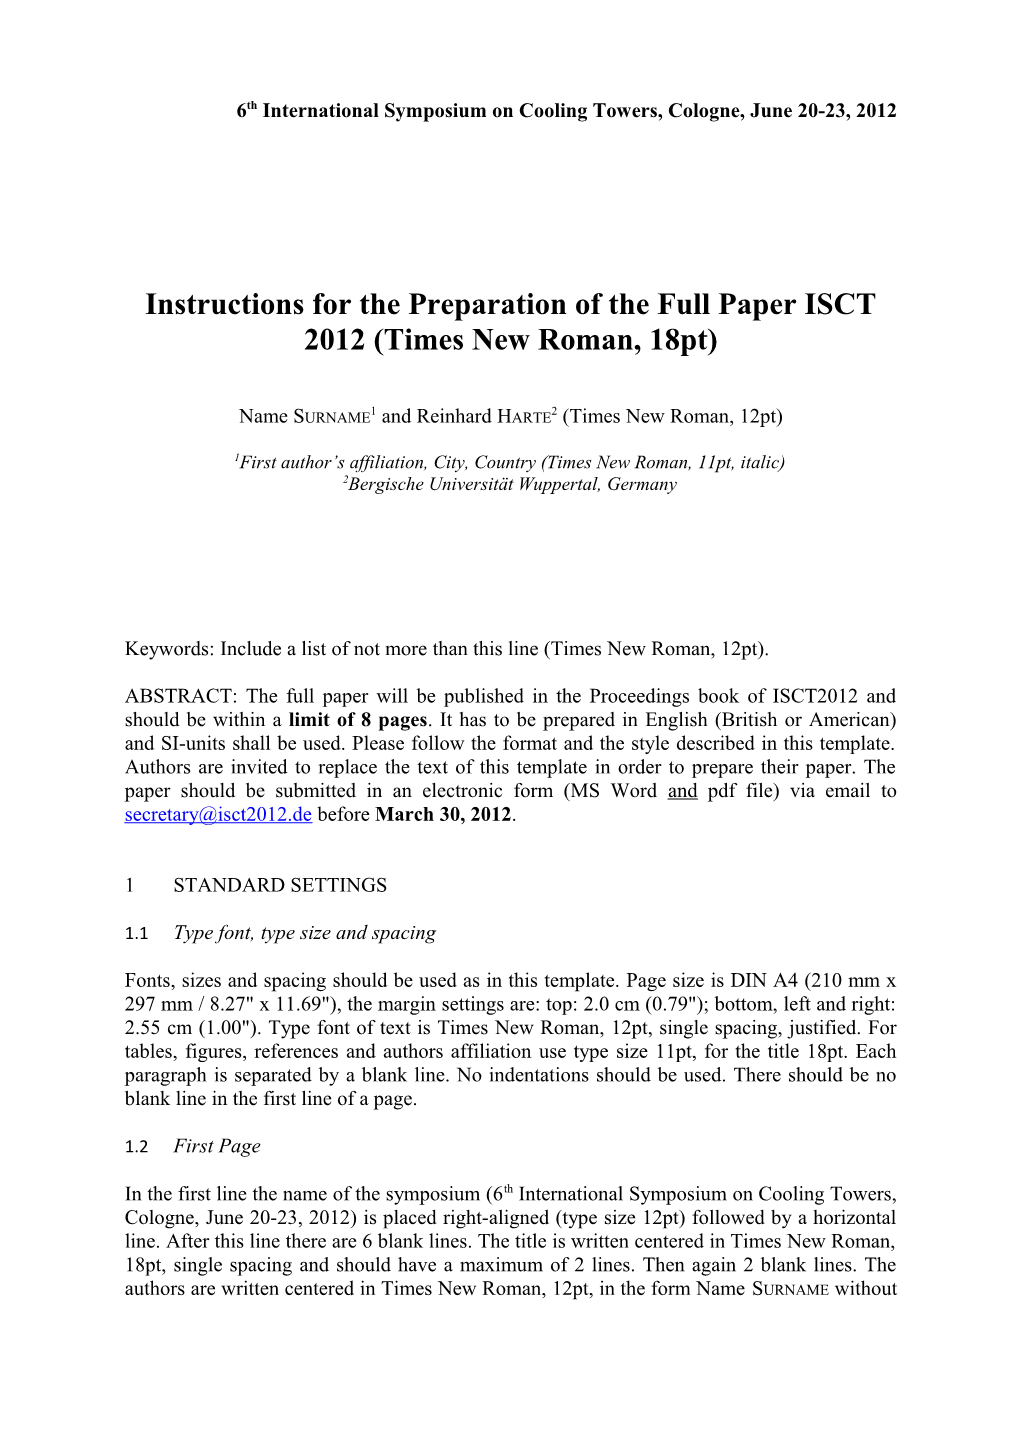 Instructions for the Preparation of the Full Paper ISCT 2012 (Times New Roman, 18Pt)